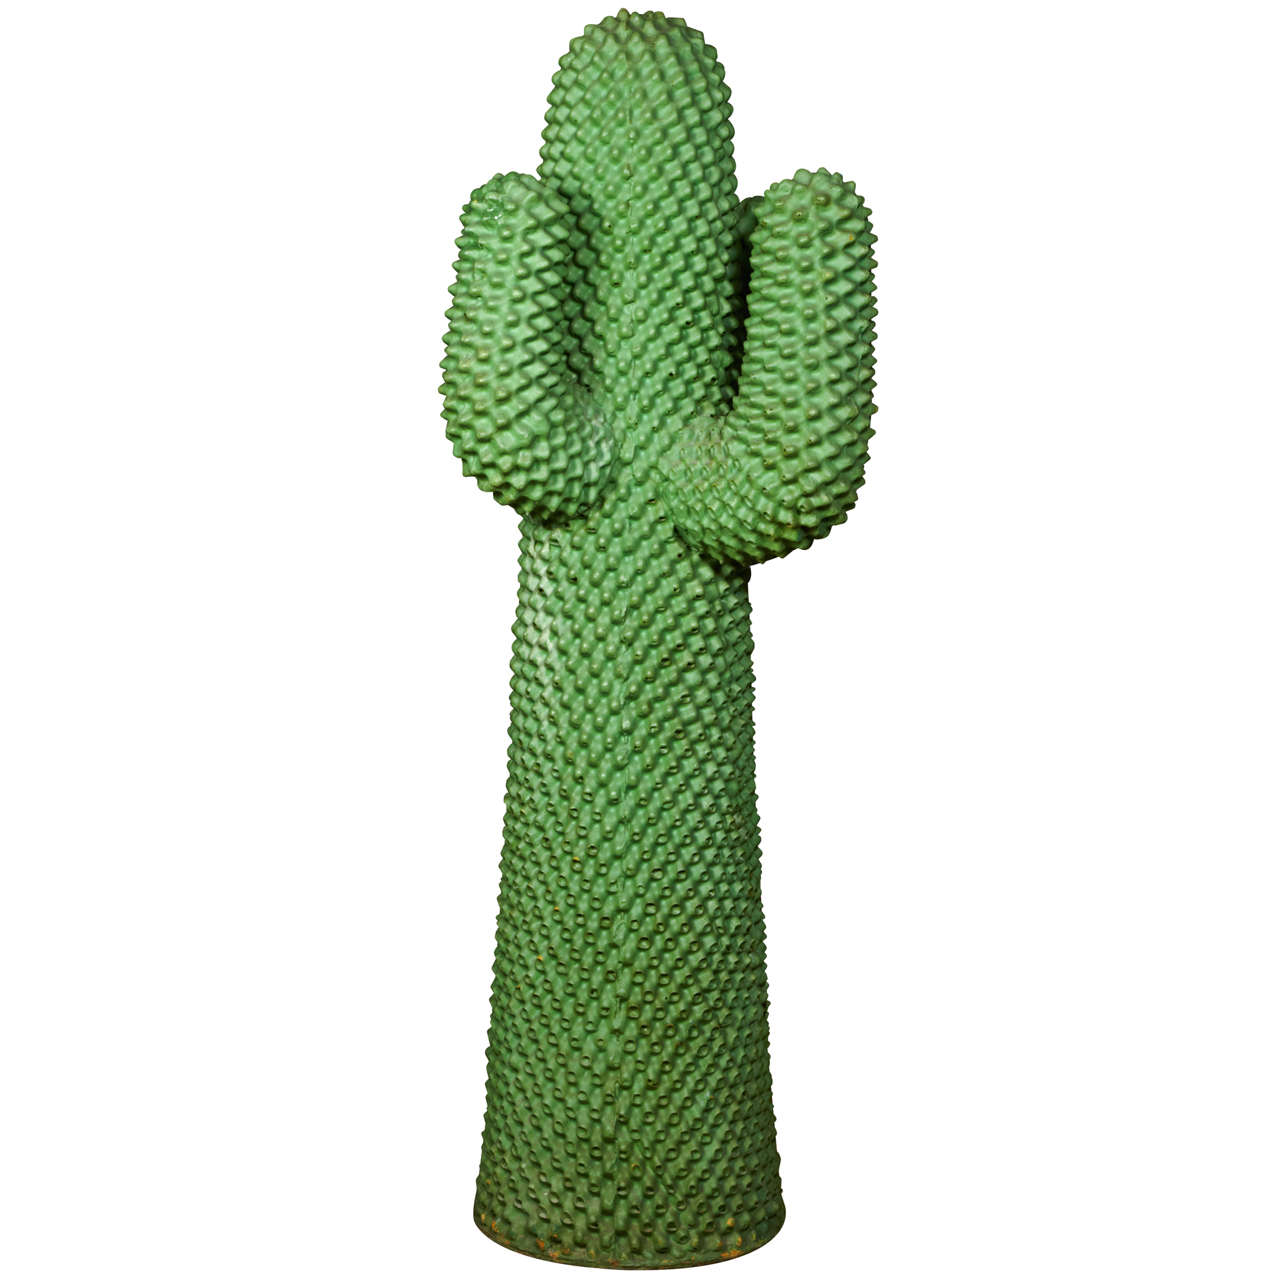 Pair Of Cactus Coat Hangers By Drocco And Mello